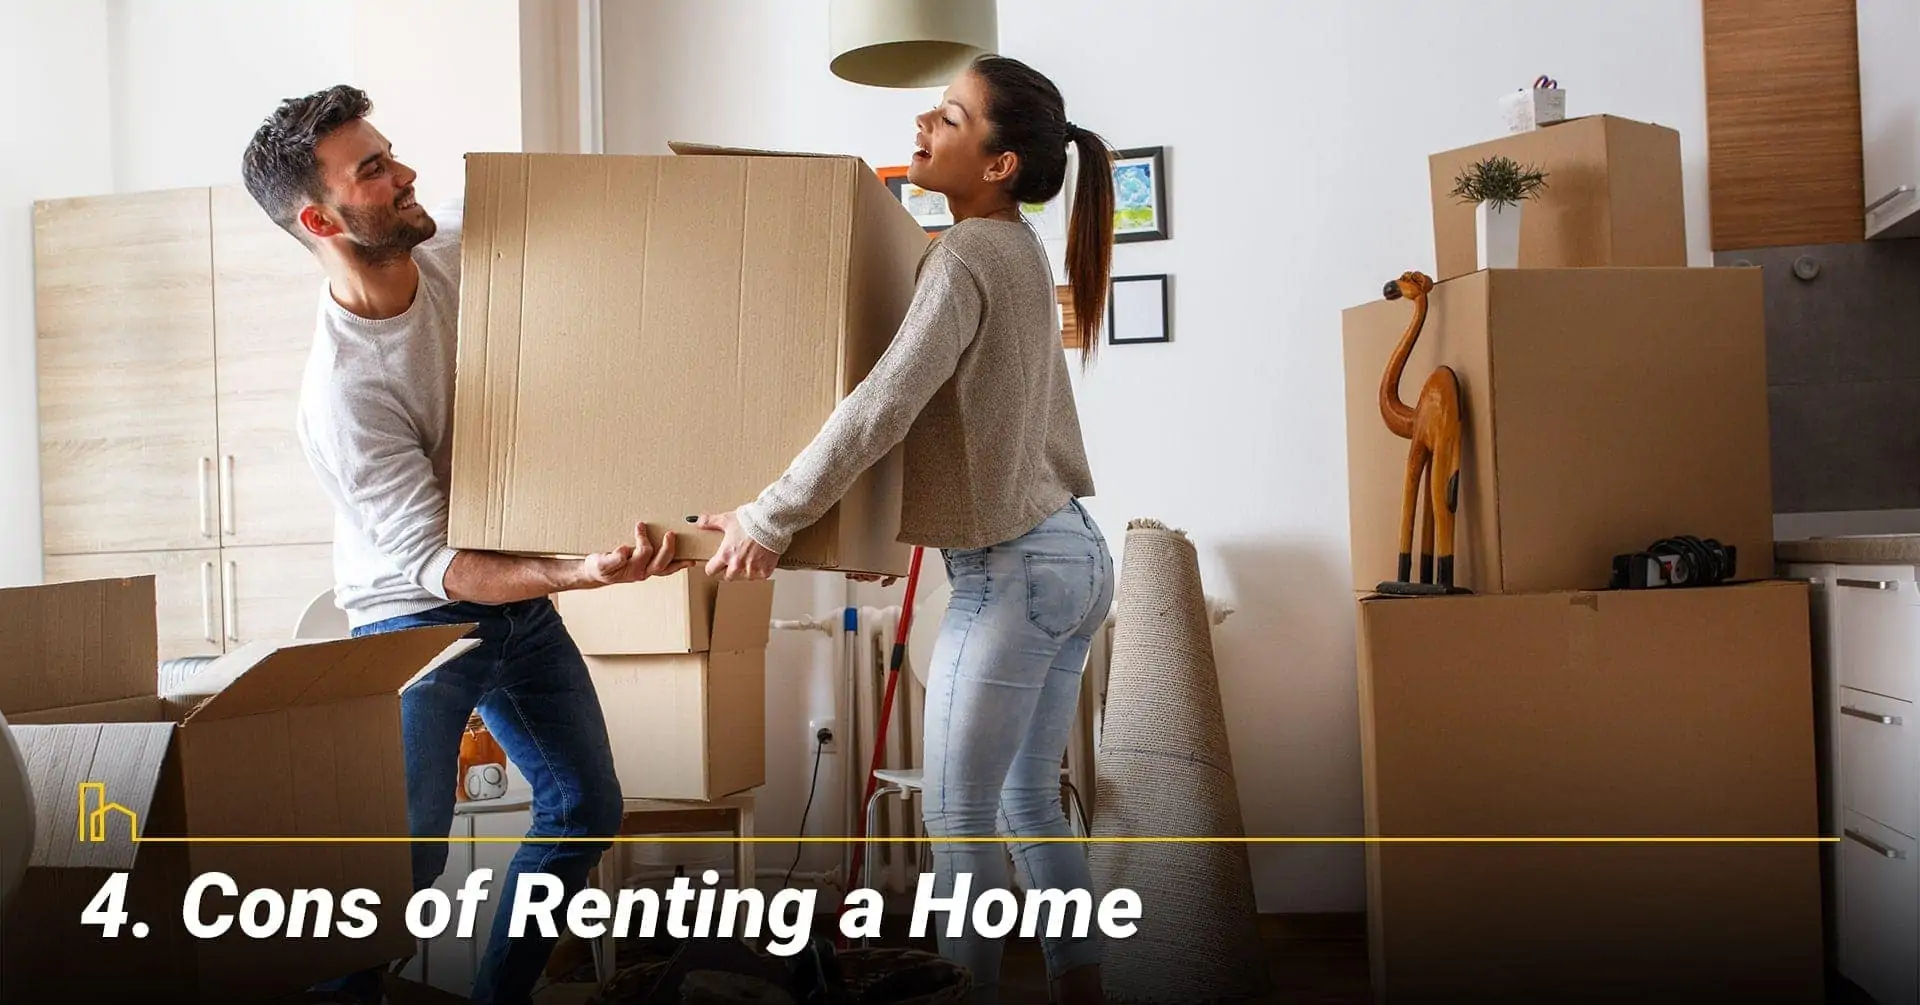 Cons of Renting a Home, disadvantages of rent out your home